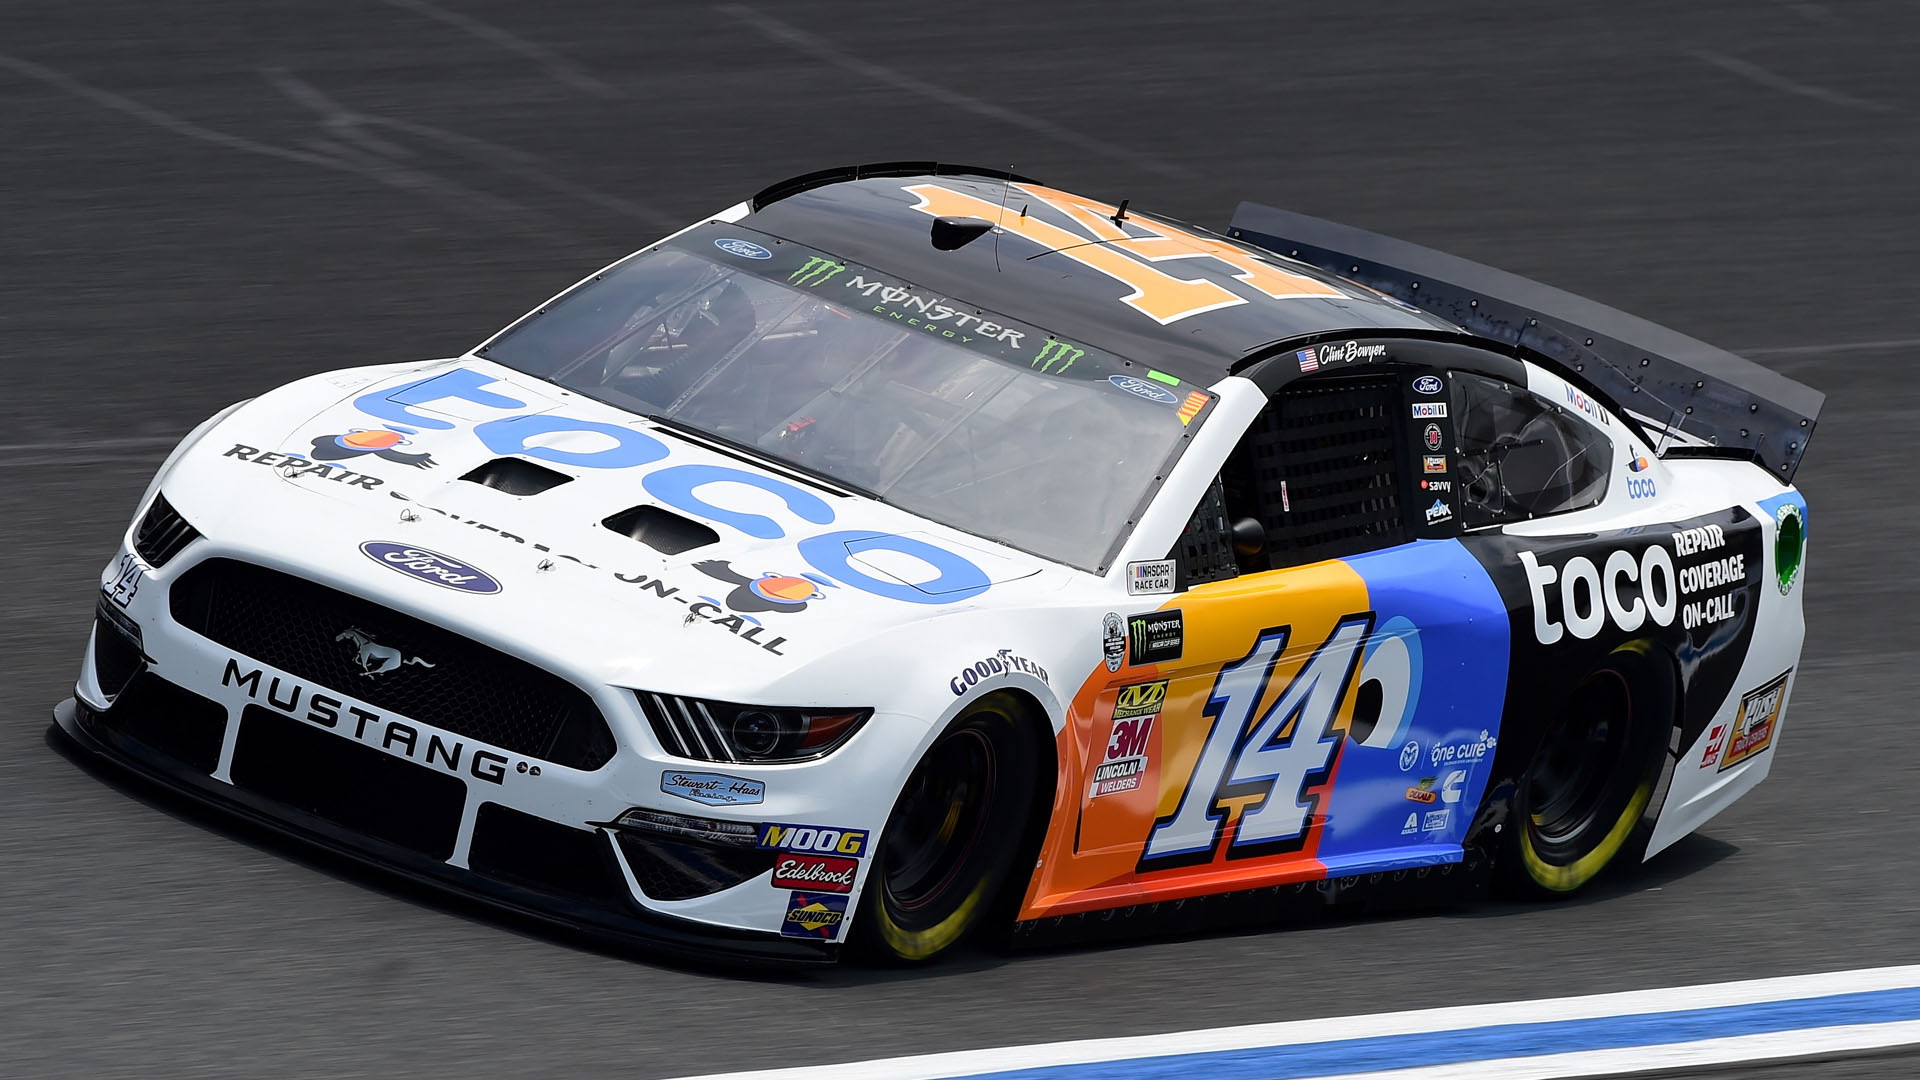 NASCAR starting lineup at Las Vegas: Clint Bowyer wins pole, field set for South Point 400